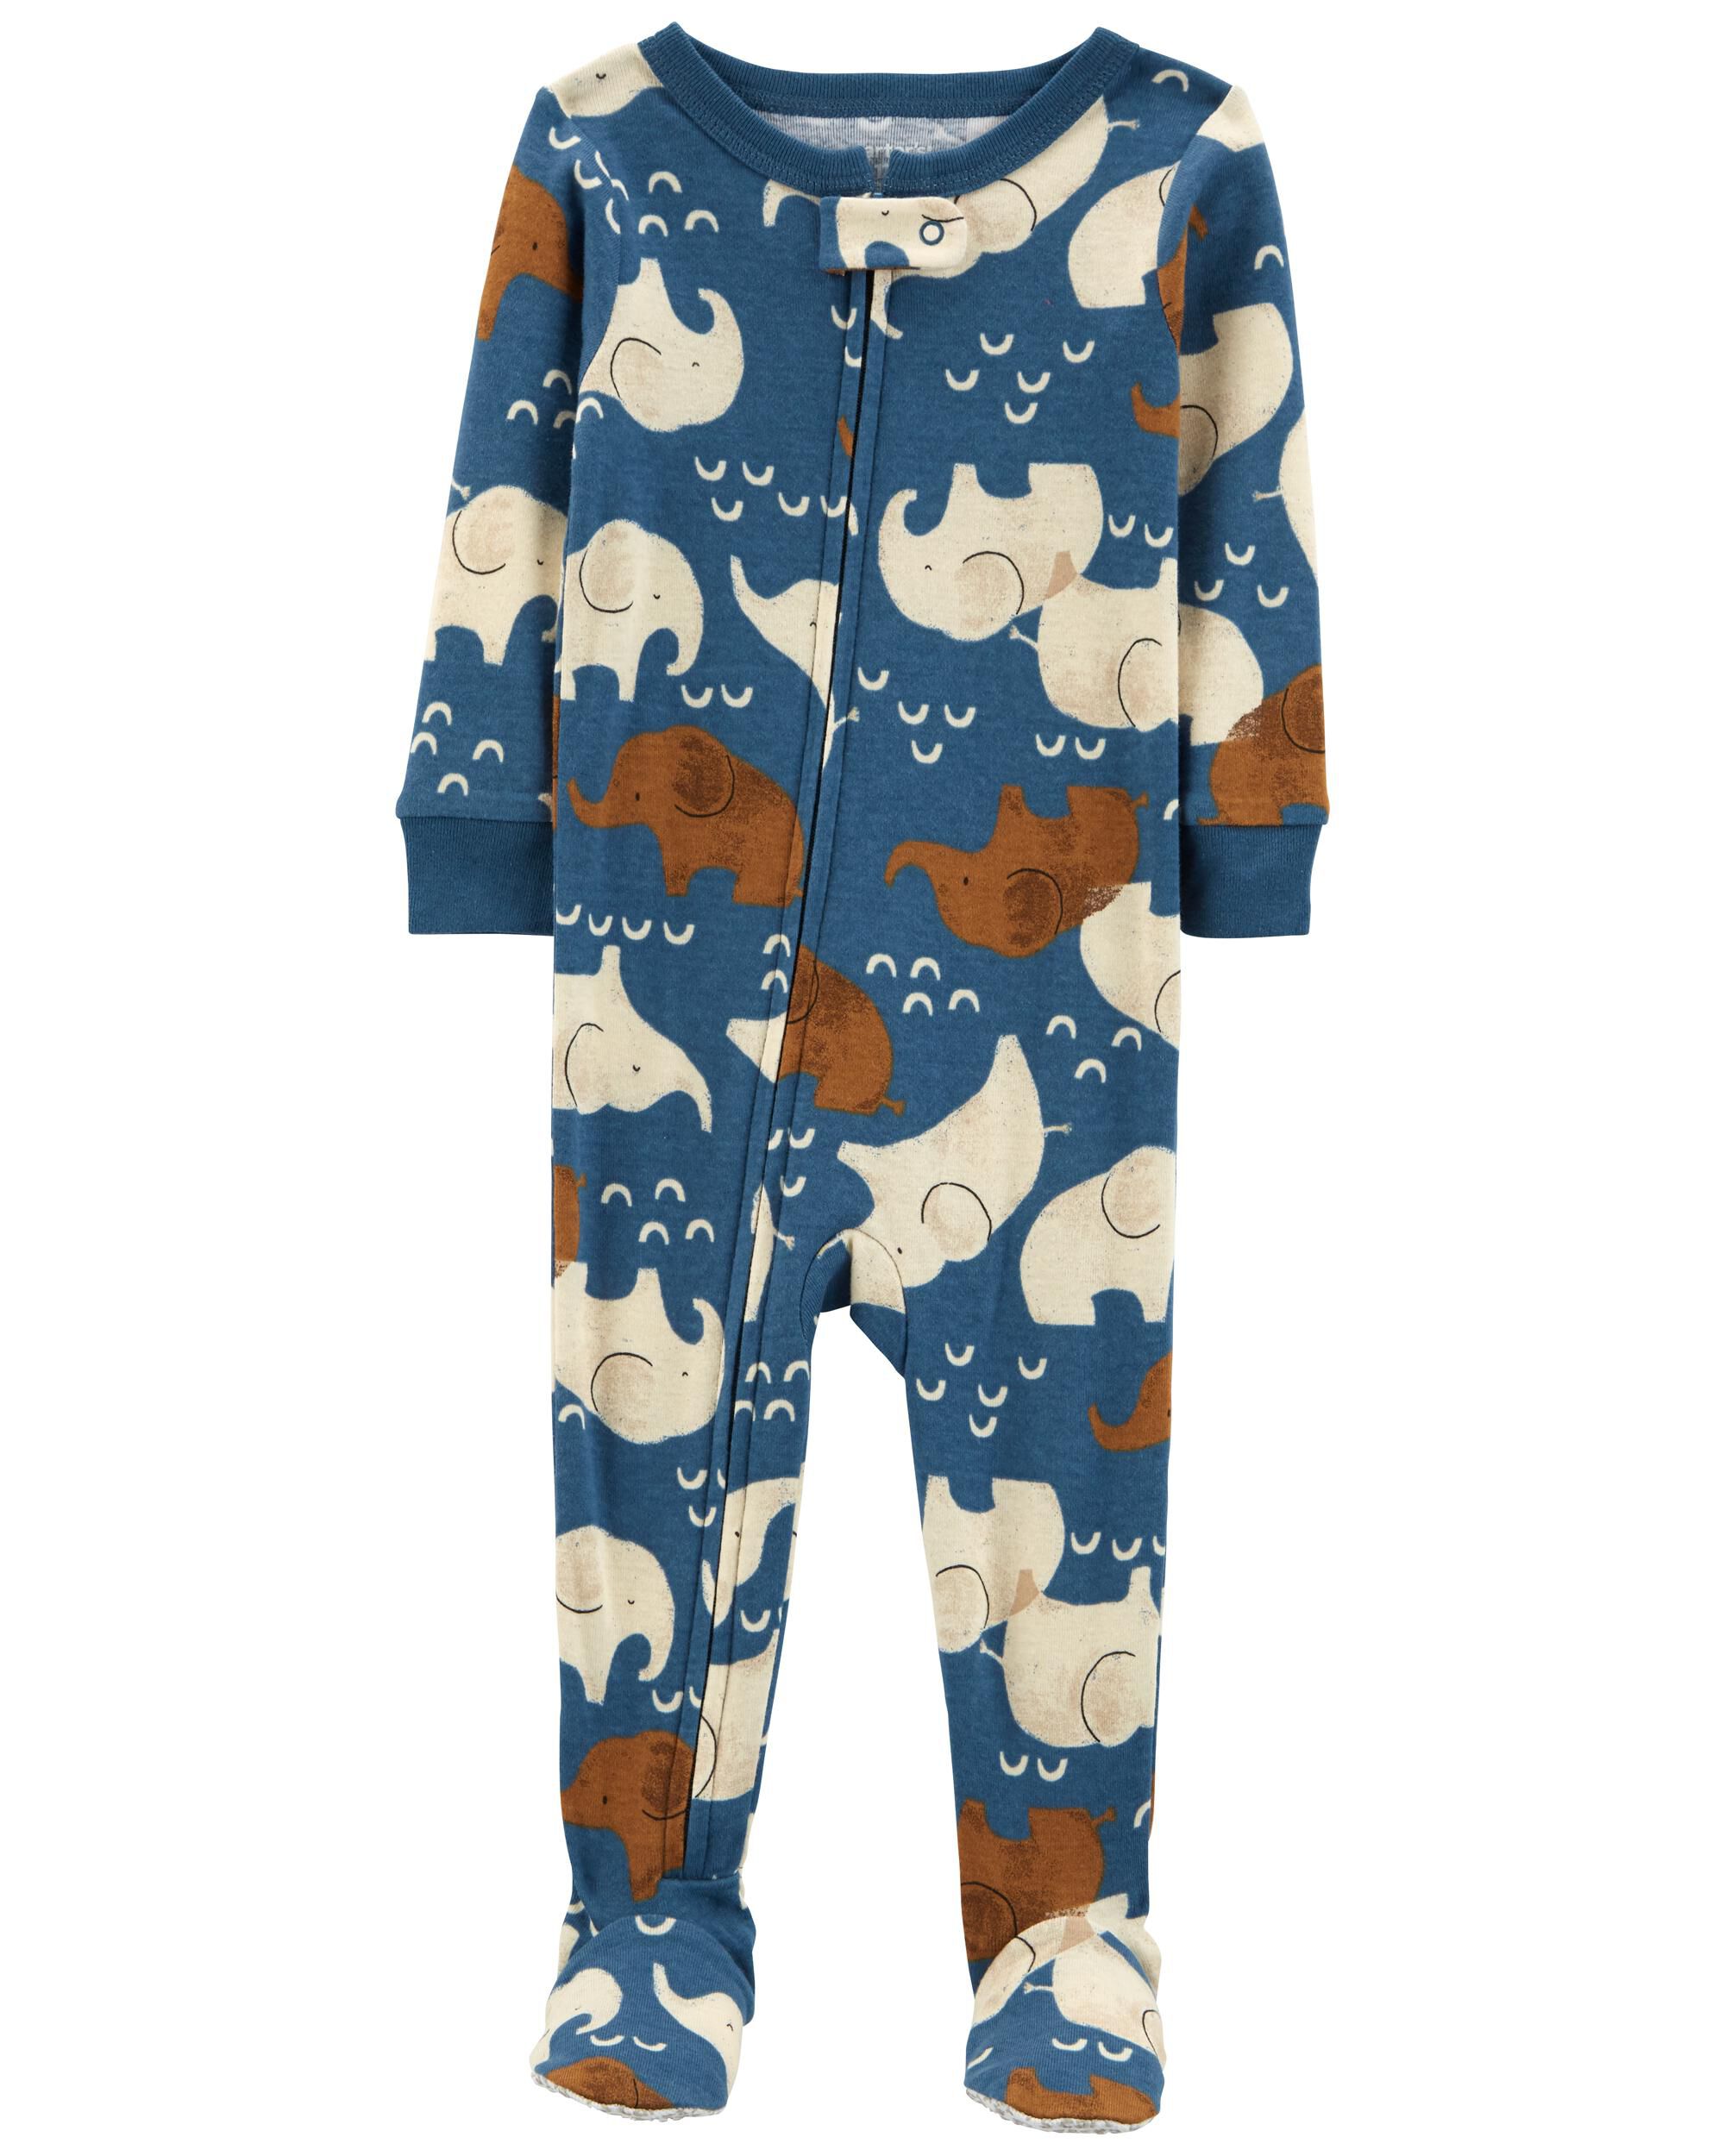 Carters Baby Boys 1 Piece Cotton Footed Sleepers